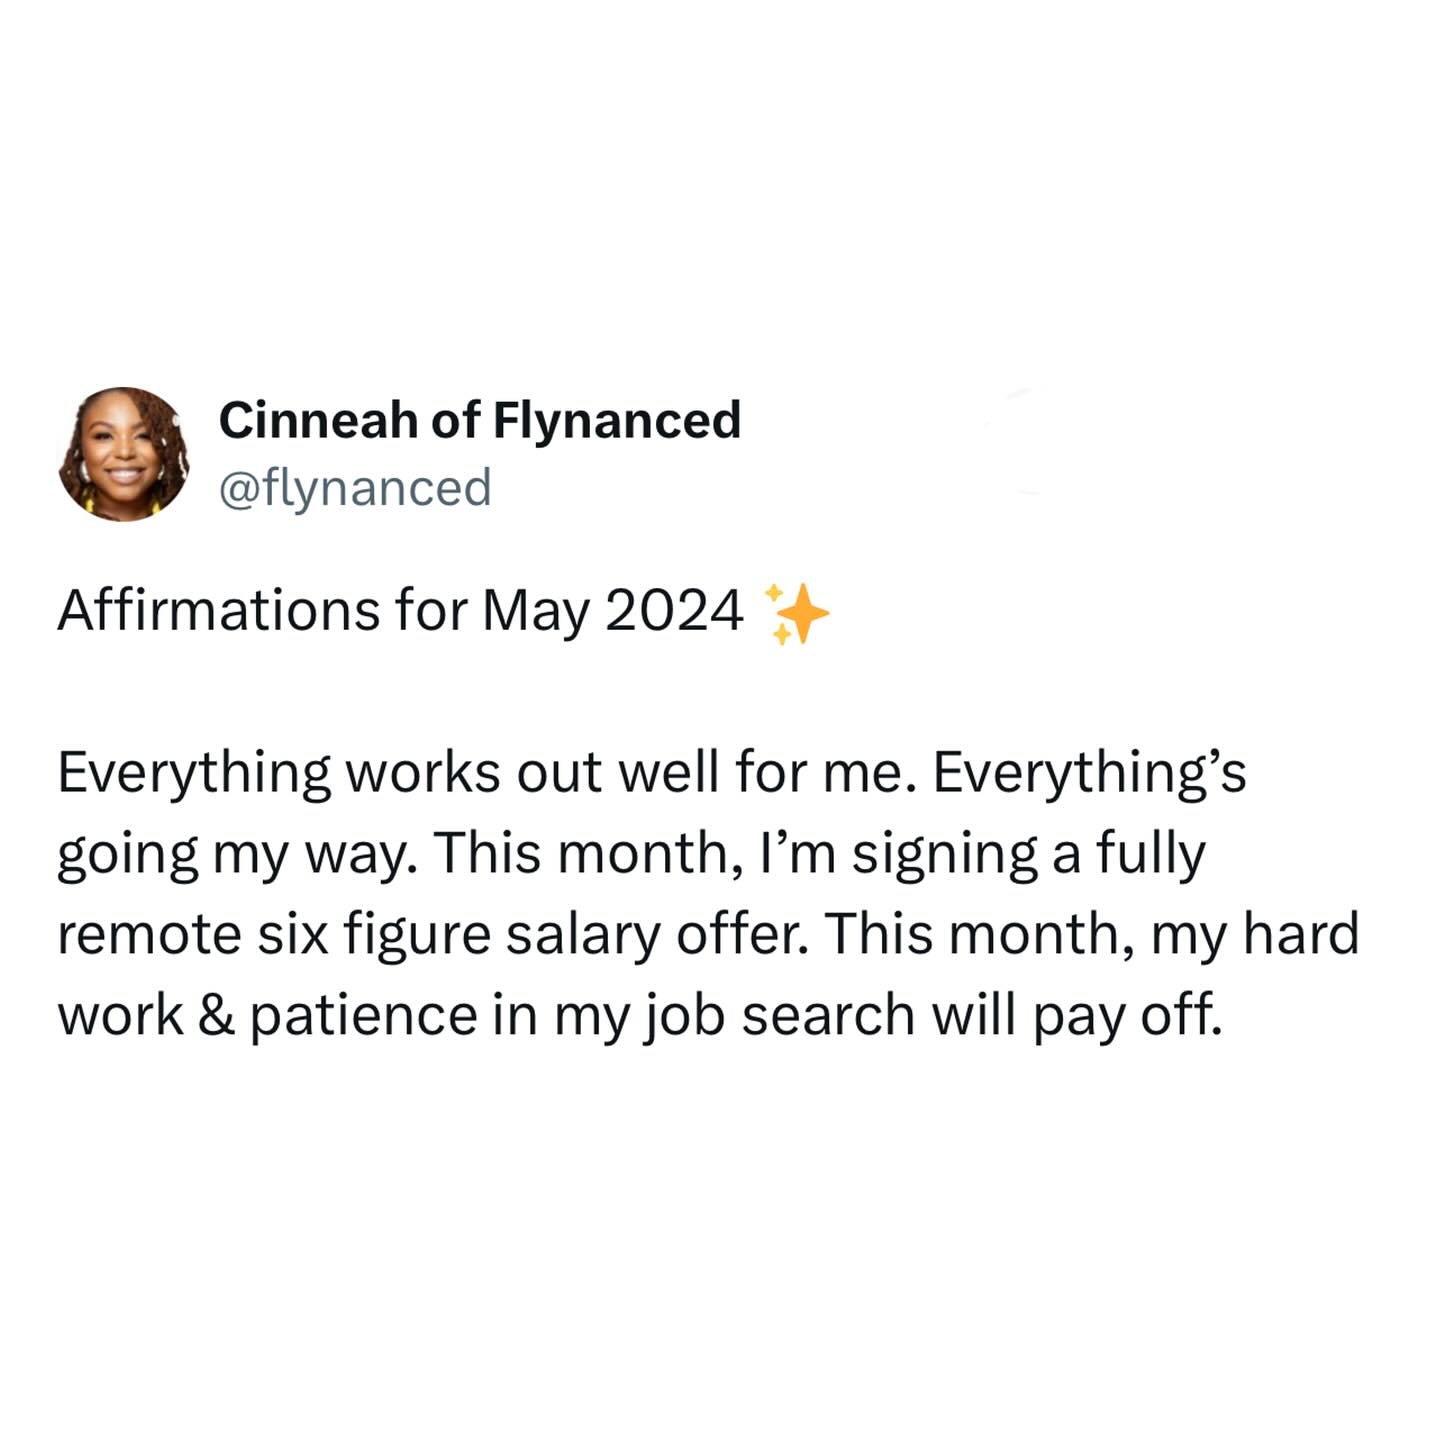 May feels like a new job offer is coming this month! 🔜

I&rsquo;m hosting a free webinar for my fellow job seekers next week - head to my stories to vote on the topic now! 

Drop a 🙏🏾 if you&rsquo;re claiming this month&rsquo;s affirmation!